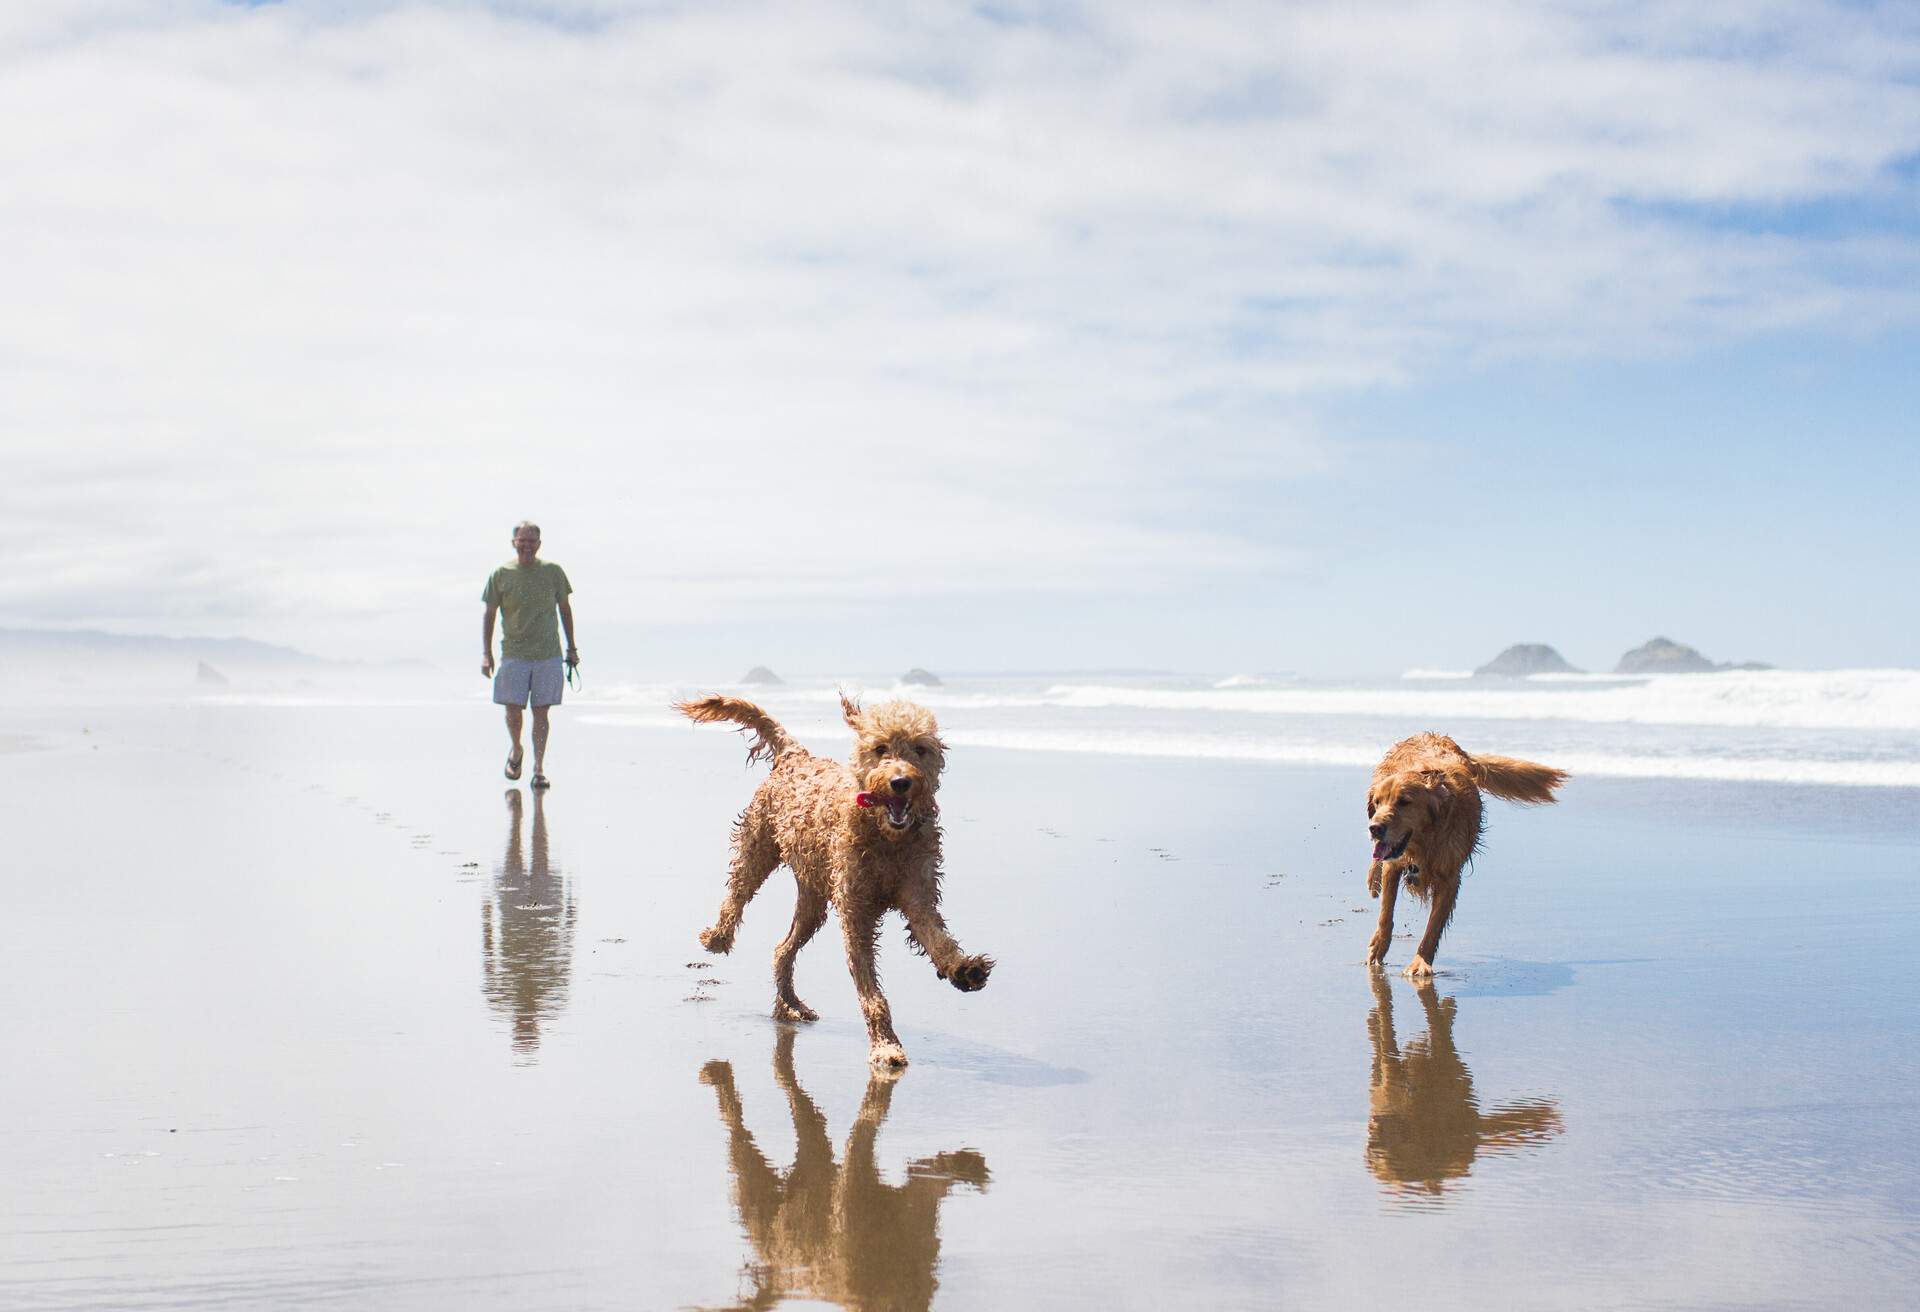 theme_dog_travel_beach_gettyimages-453108841_universal_within-usage-period_83138